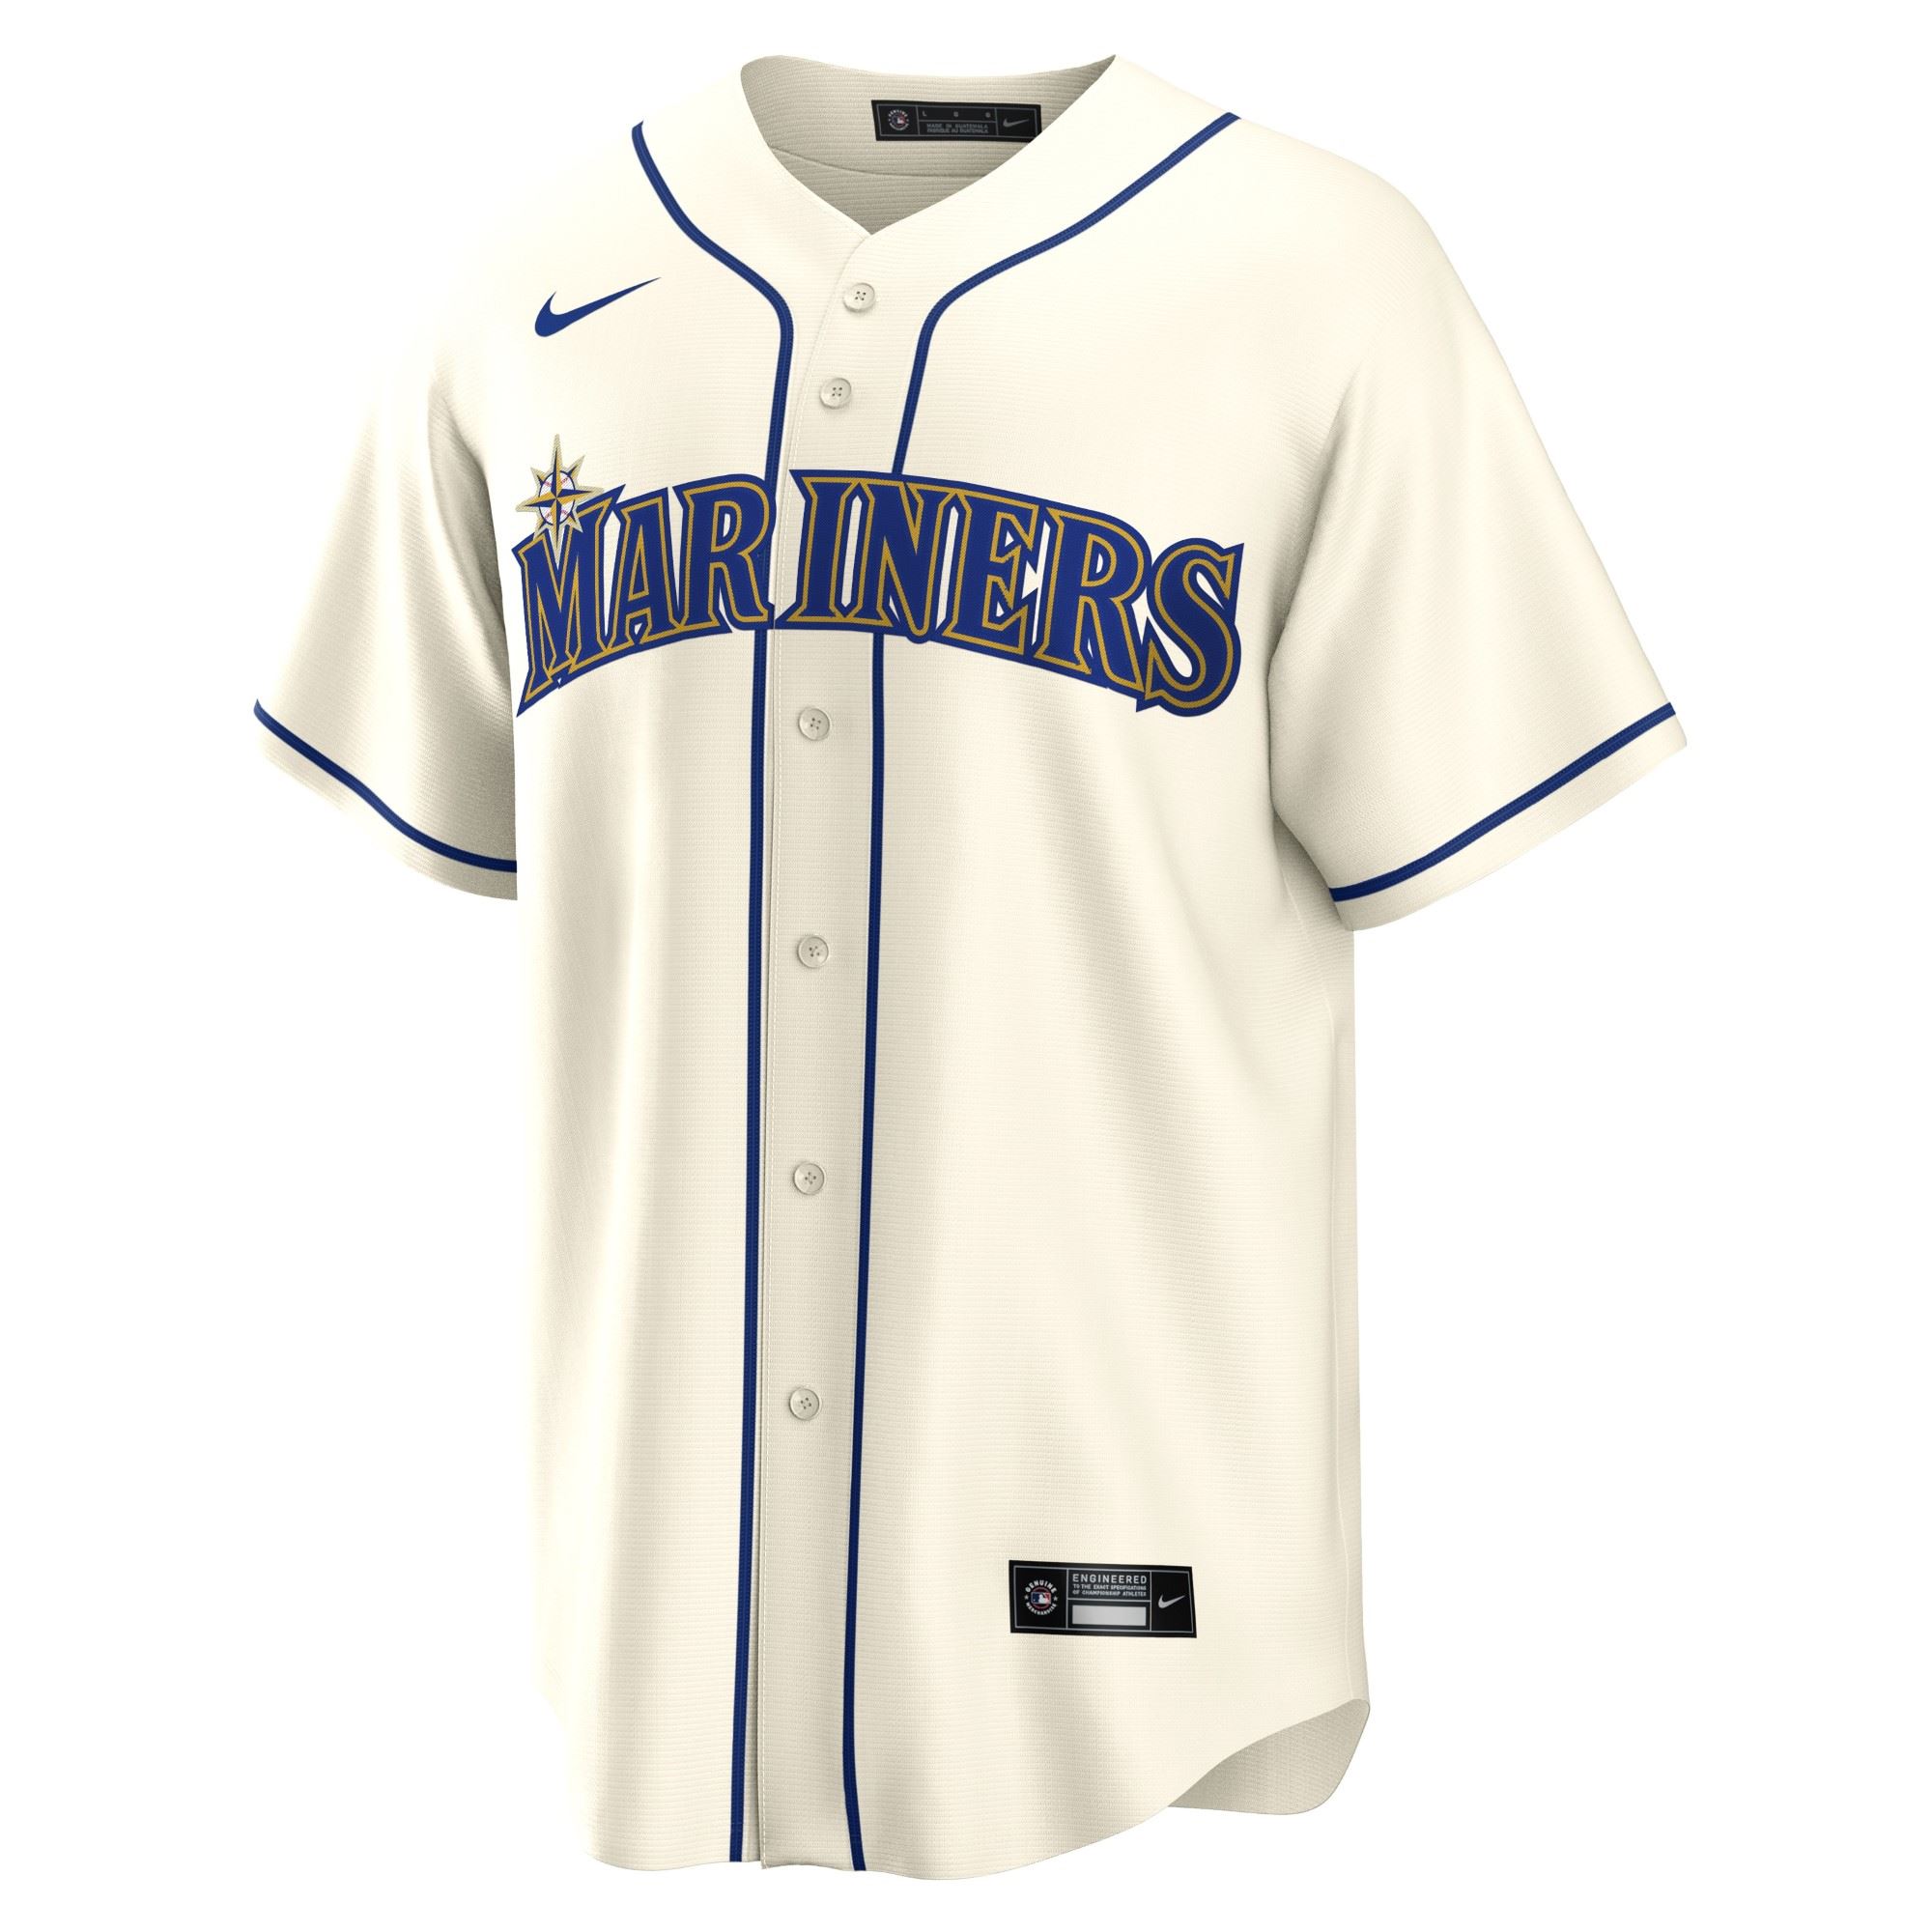 Seattle Mariners Off-White Official MLB Replica Alternate Road Jersey Nike